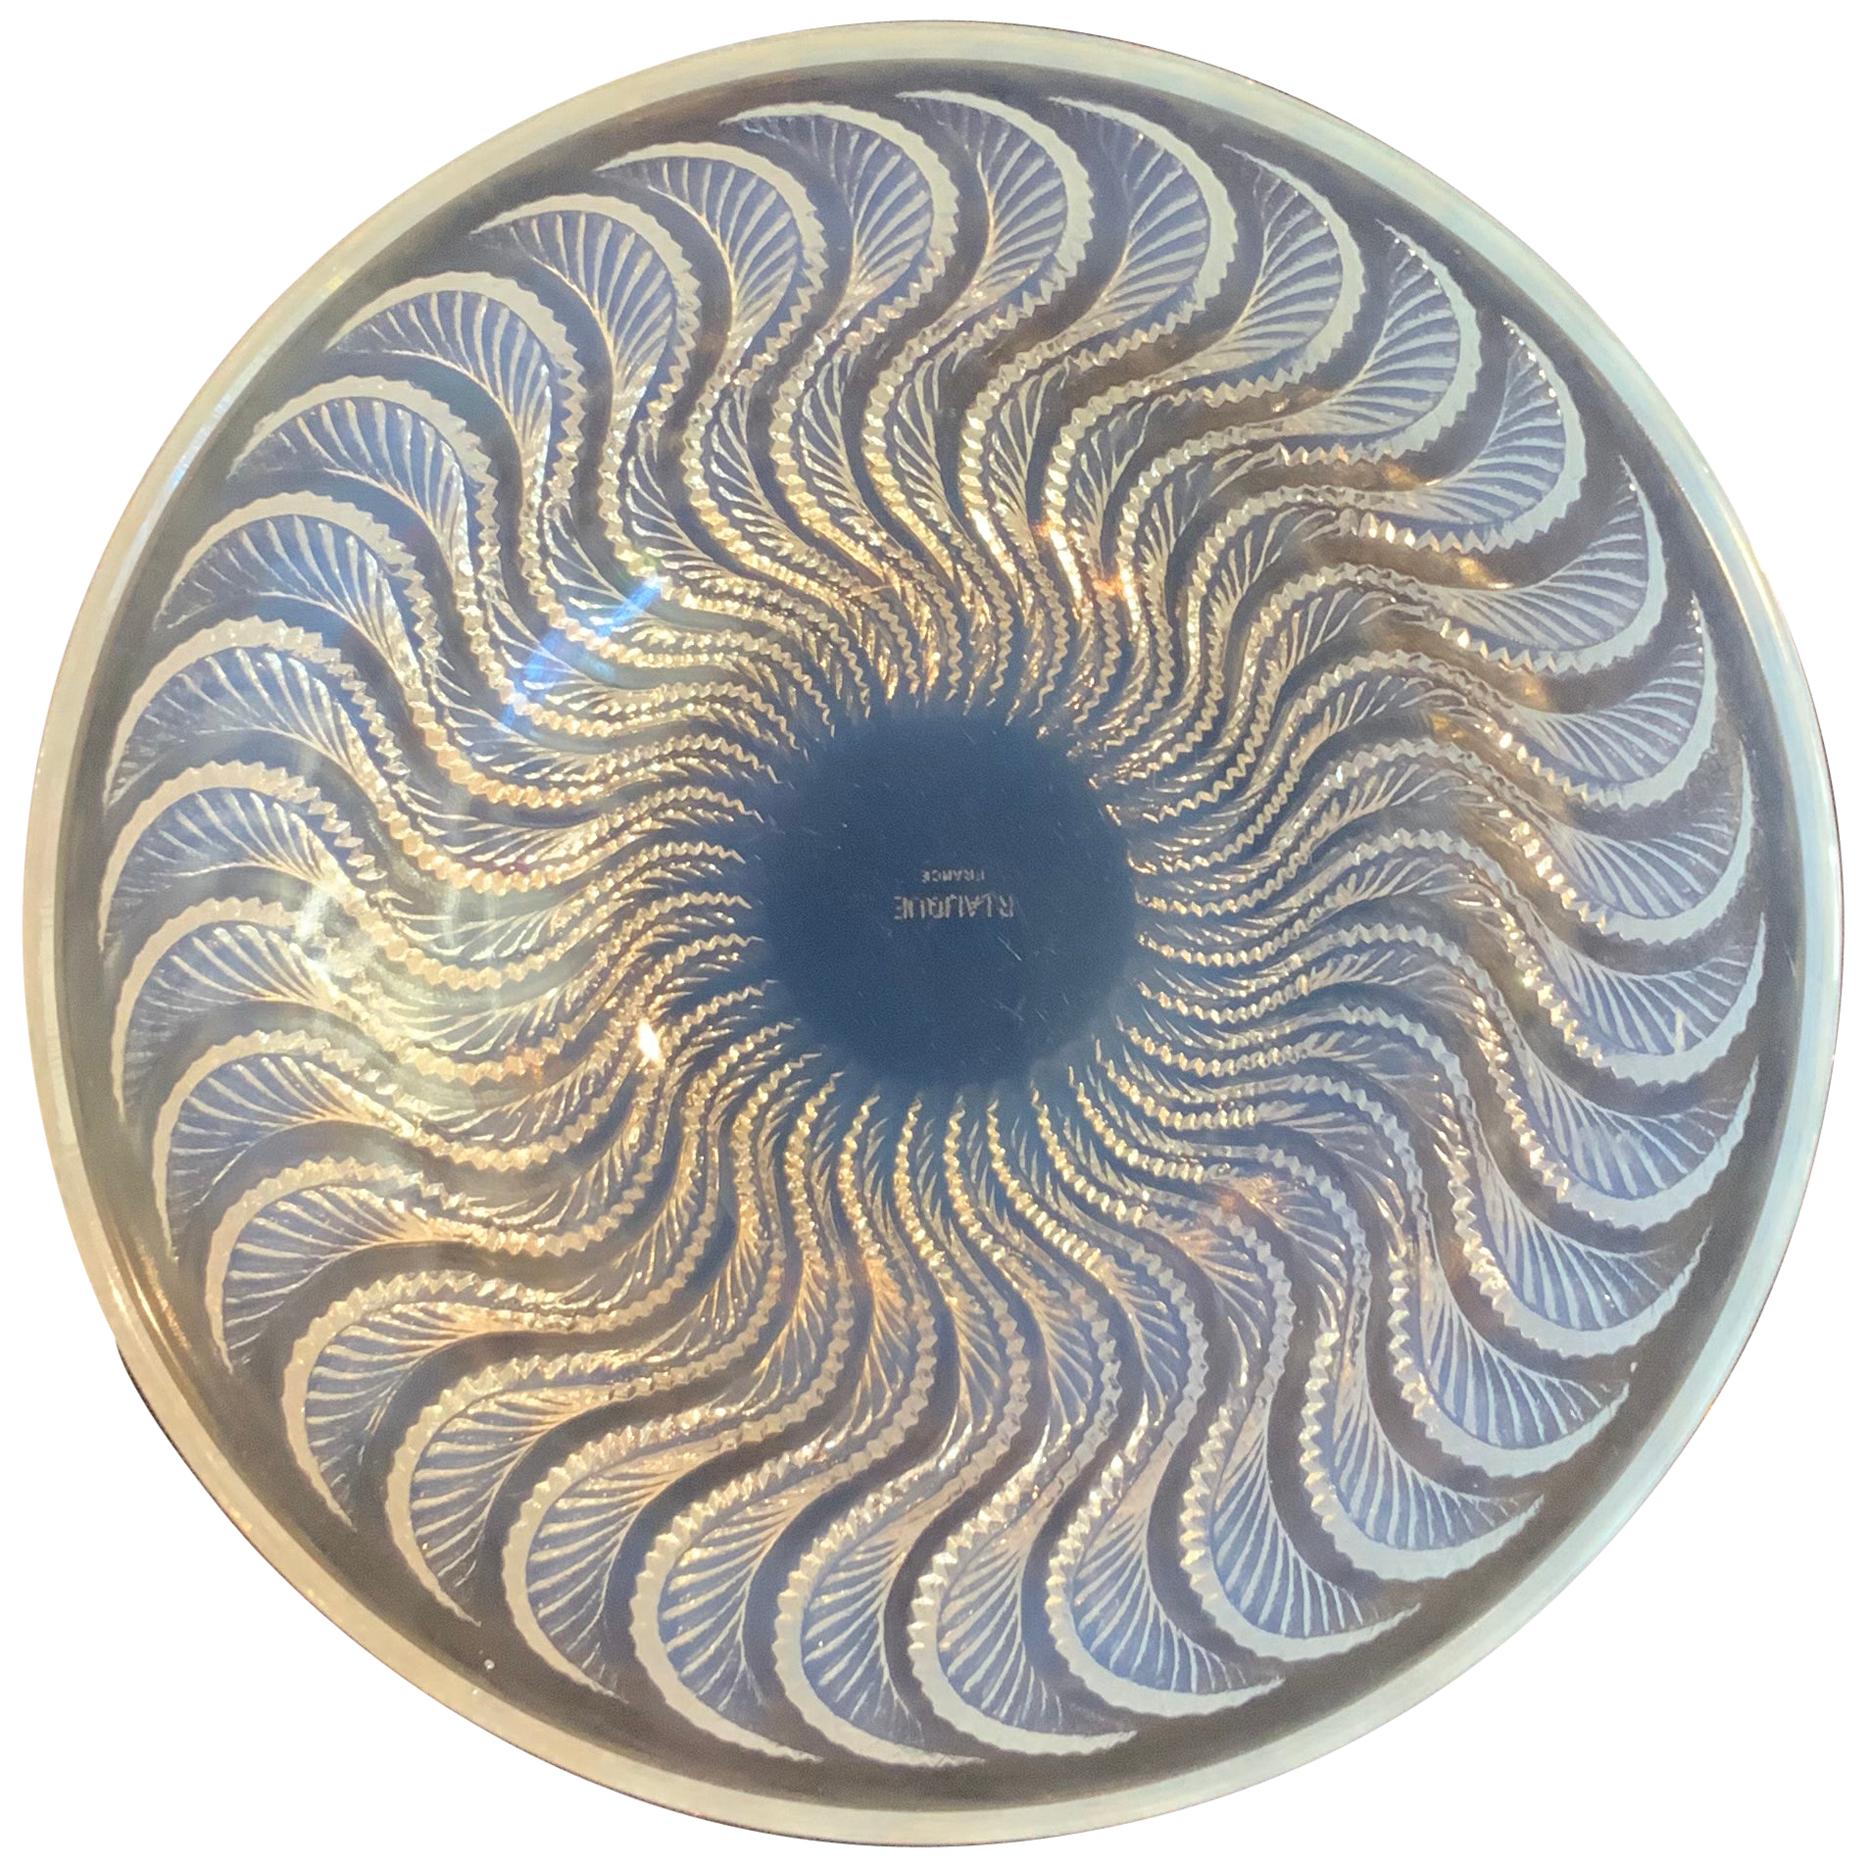 Lalique Iridescent Bowl with Feathered, Swirl Design Marked R Lalique